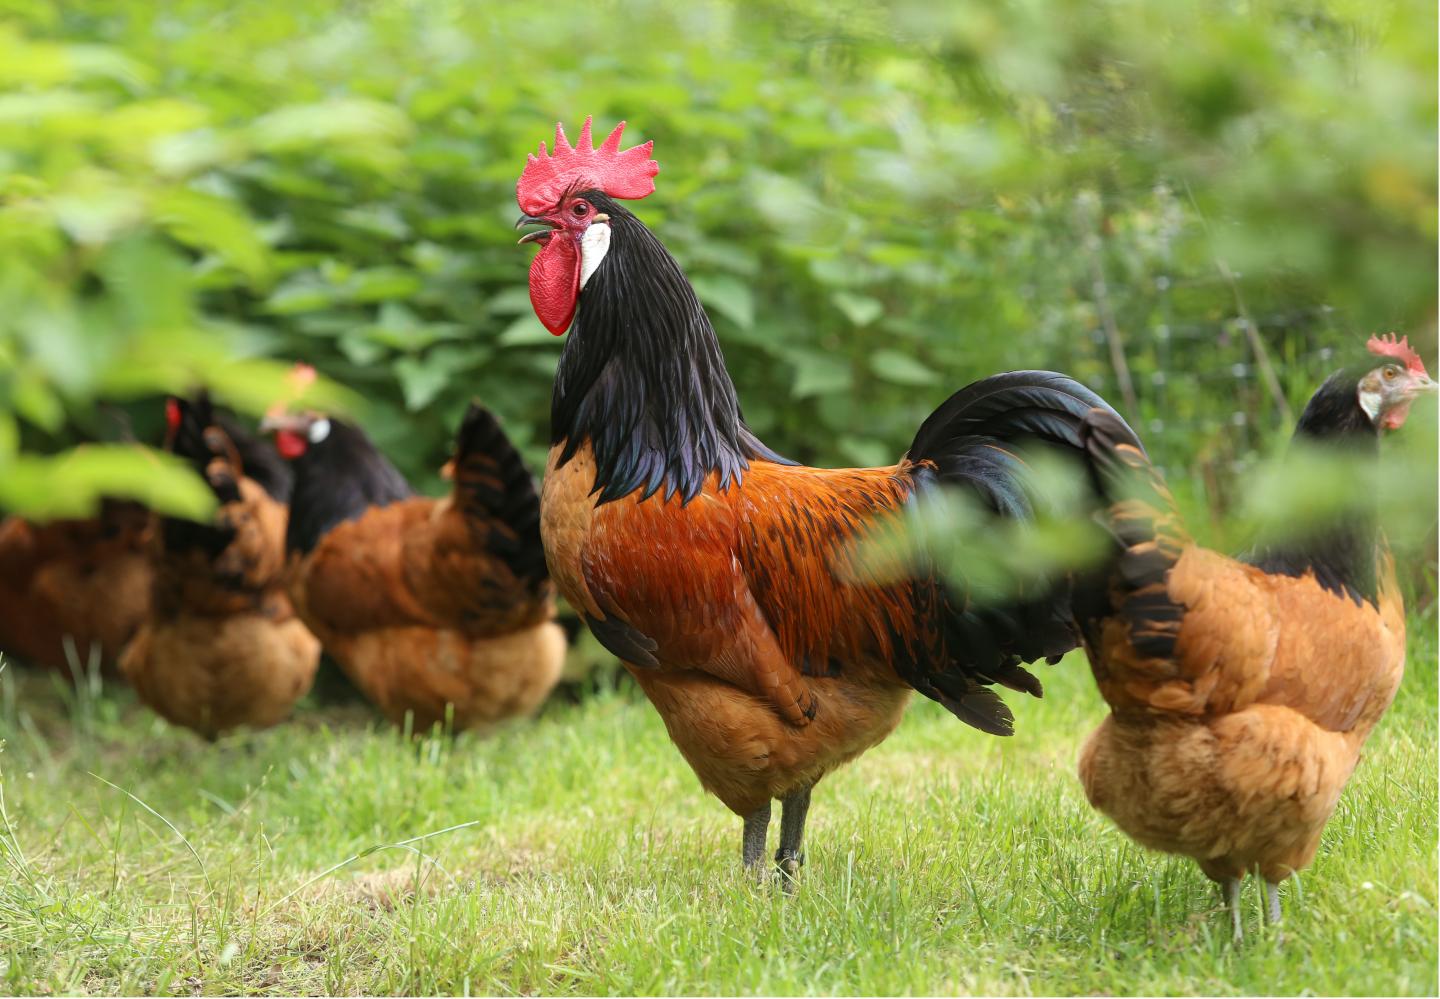 Cockerel and hens on green grass with foliage behind